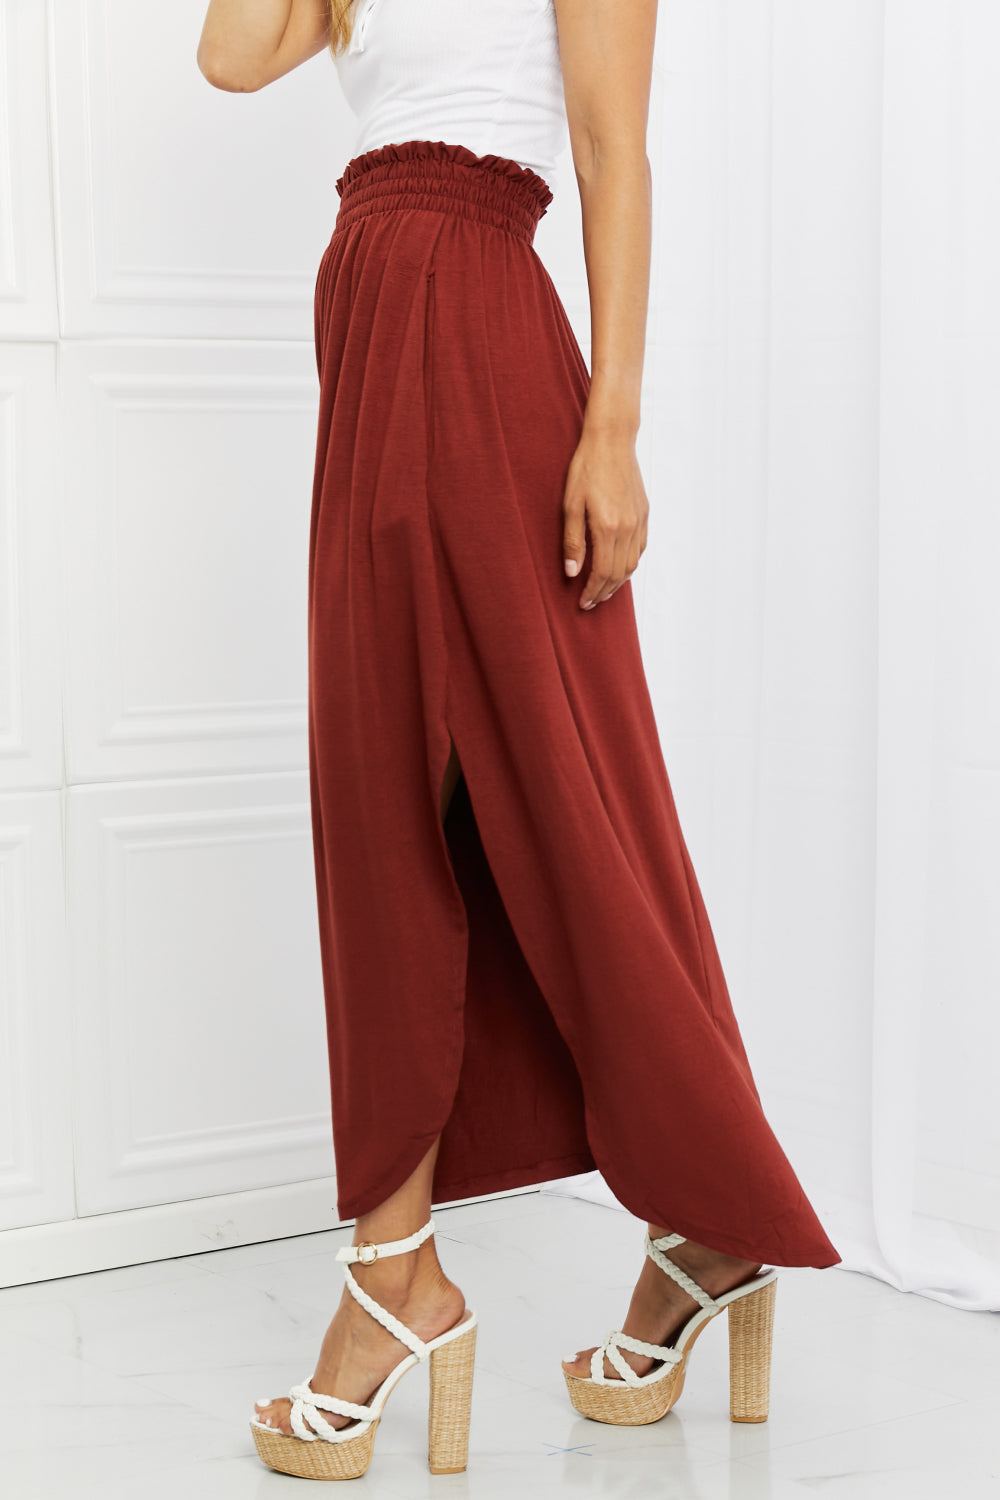 Zenana It's My Time Full Size Side Scoop Scrunch Skirt in Dark Rust  Southern Soul Collectives 